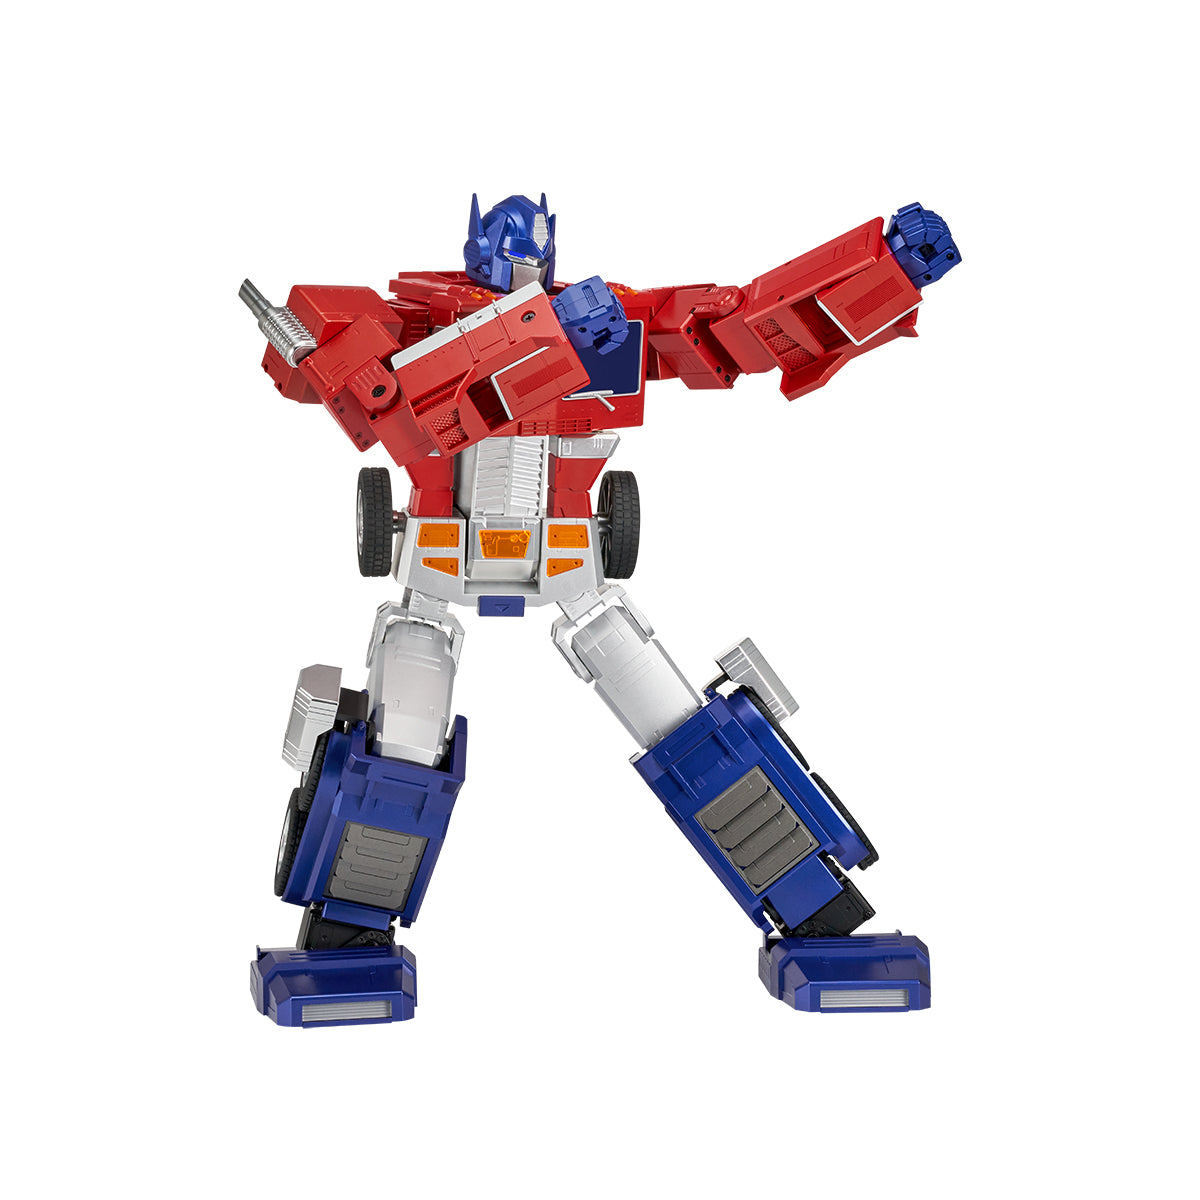 Flagship Optimus Prime Auto-converting Robot (Limited Edition)